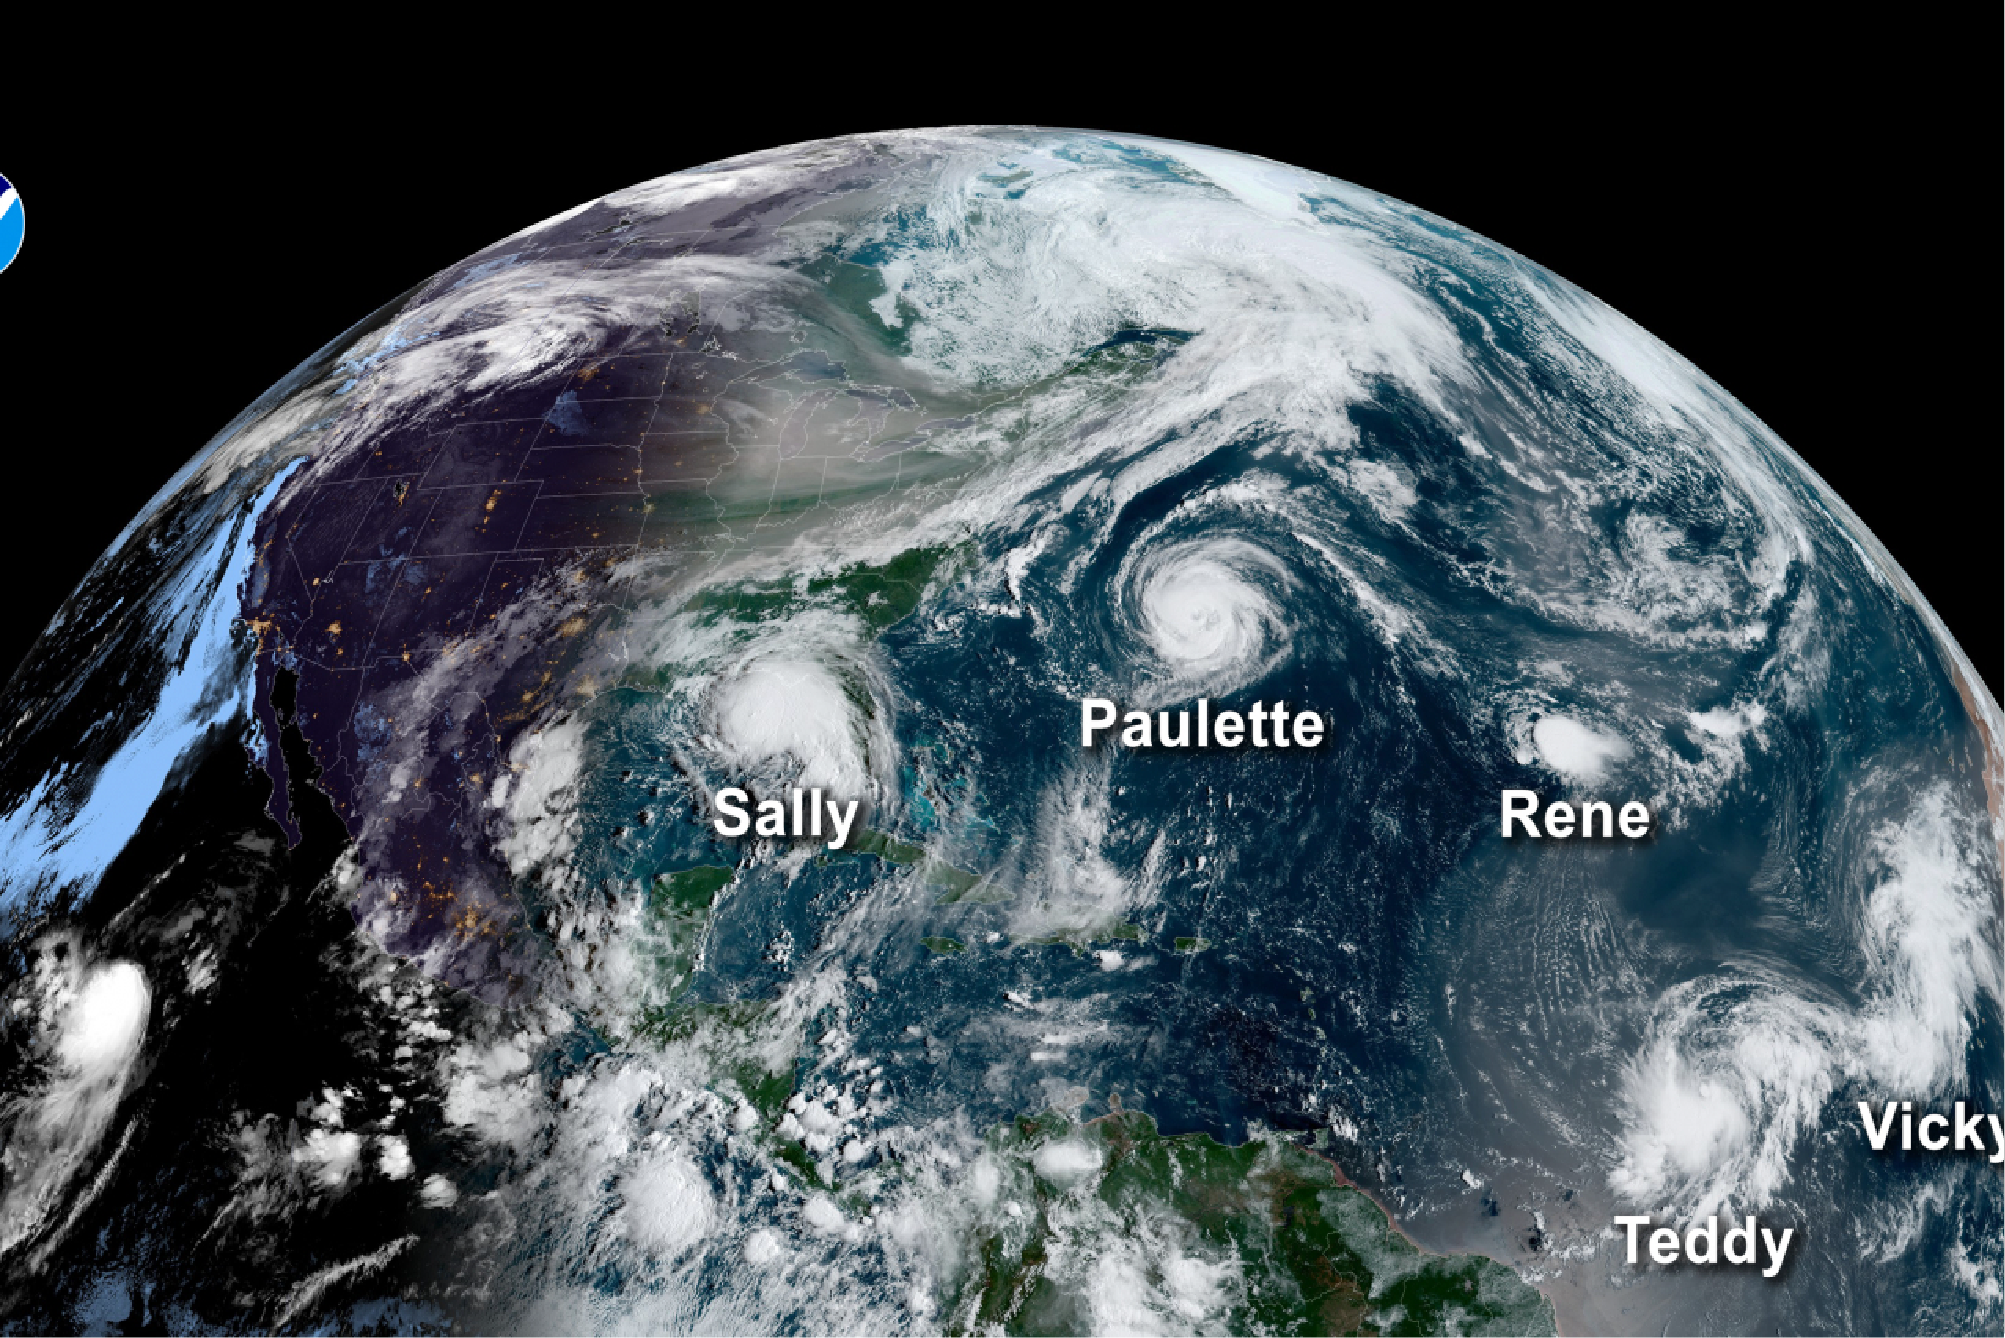 On September 14th, 2020, this satellite image captured 5 tropical systems (2 Hurricanes and 3 Tropical storms) in the Atlantic Ocean at the same time. September 2020 experienced the formation of a total of 10 named storms – the highest number for any month on record according to NOAA.